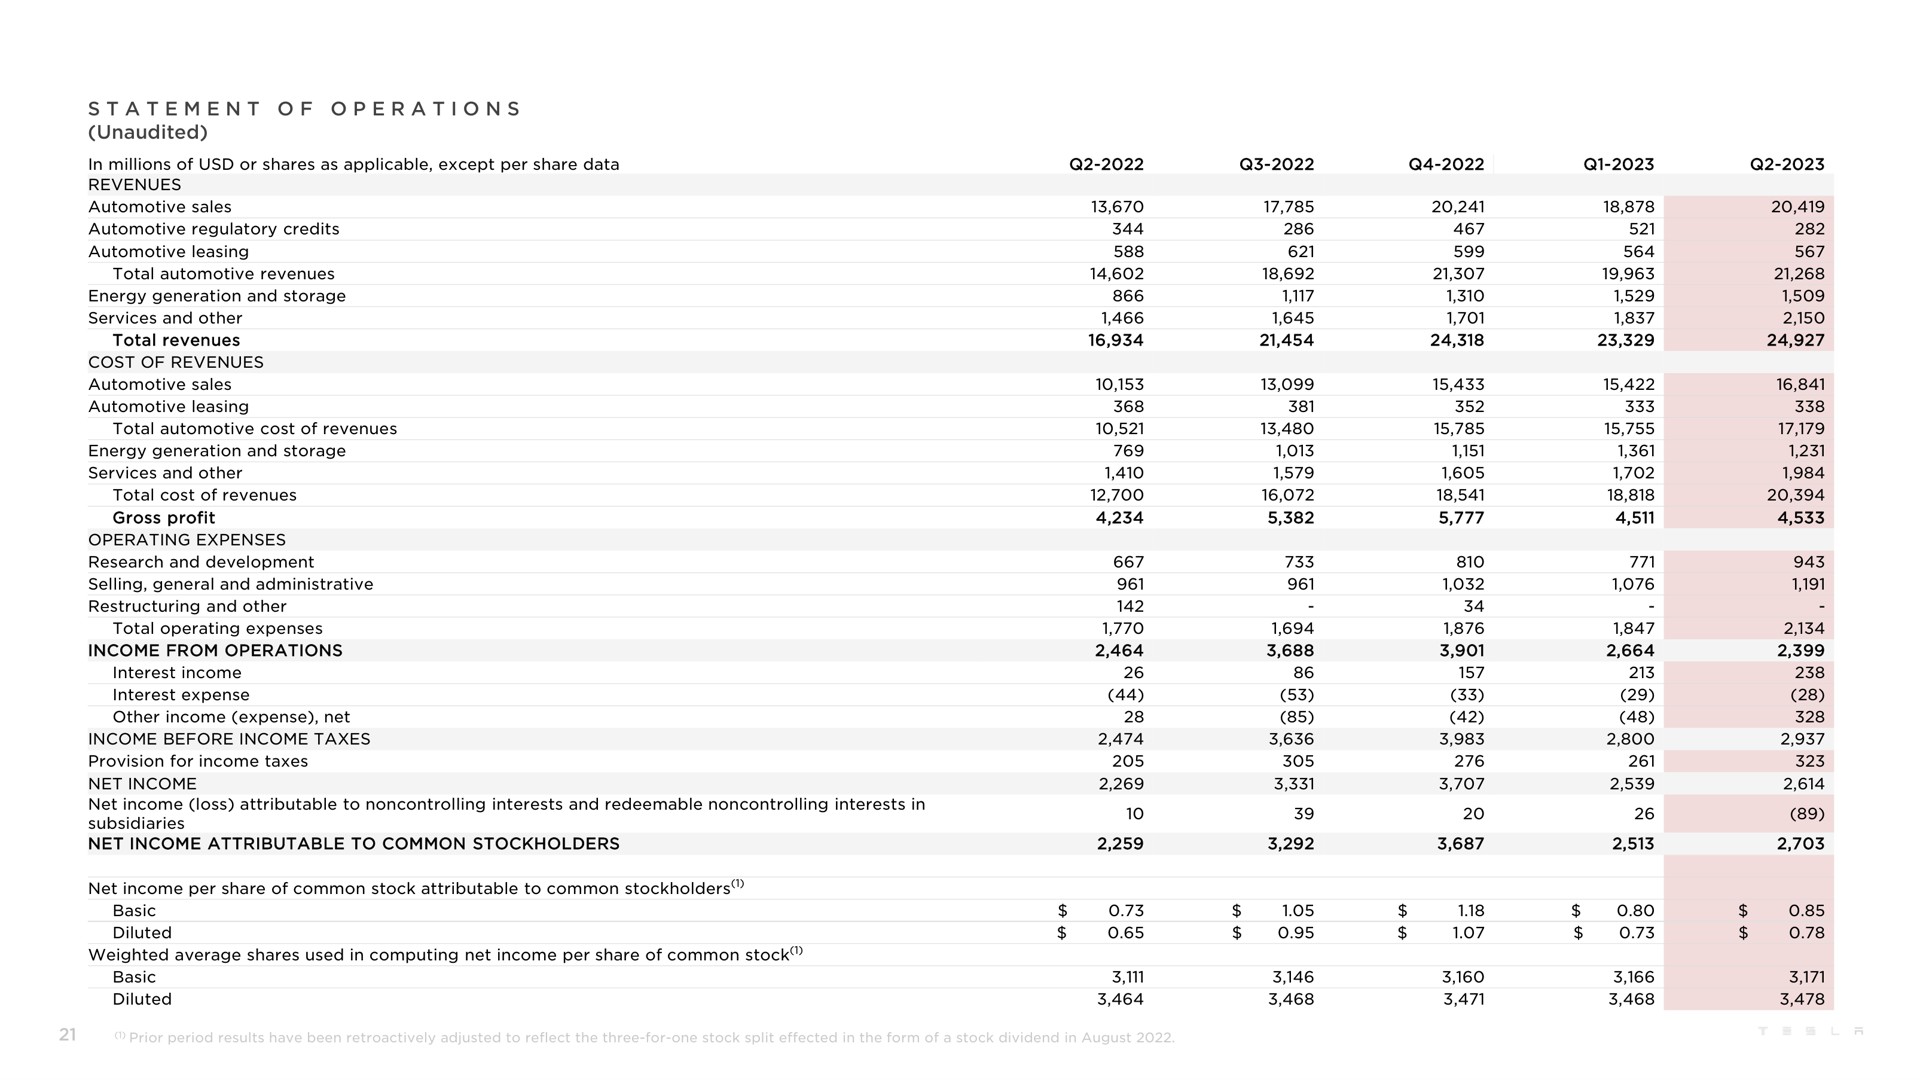 a a i unaudited statement of operations net income per share of common stock attributable to common stockholders | Tesla